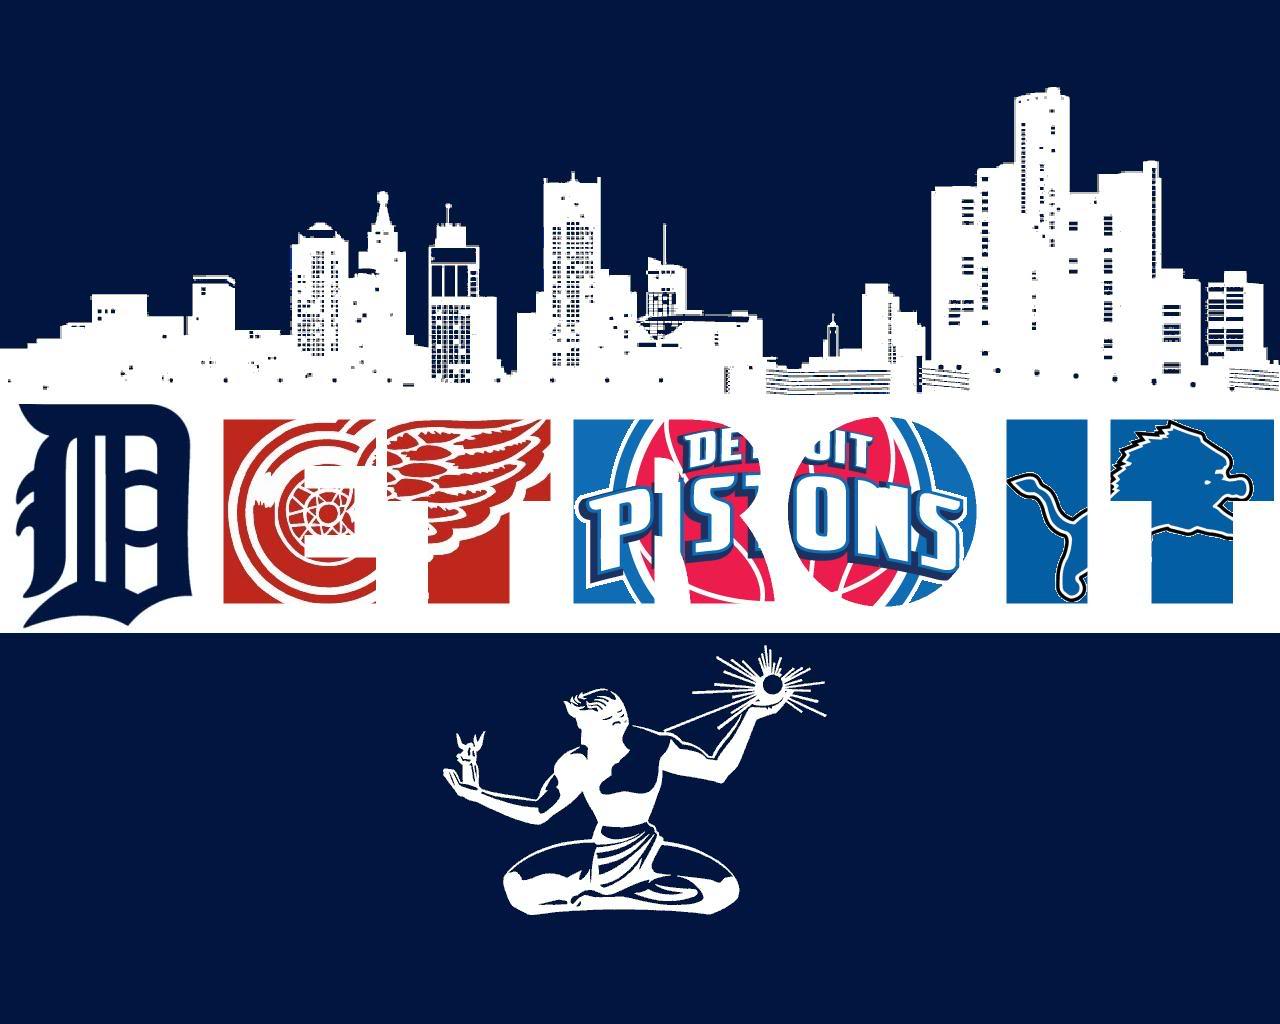 Detroit Wallpaper - Red Wings, Pistons, Tigers, Lions - Water ...